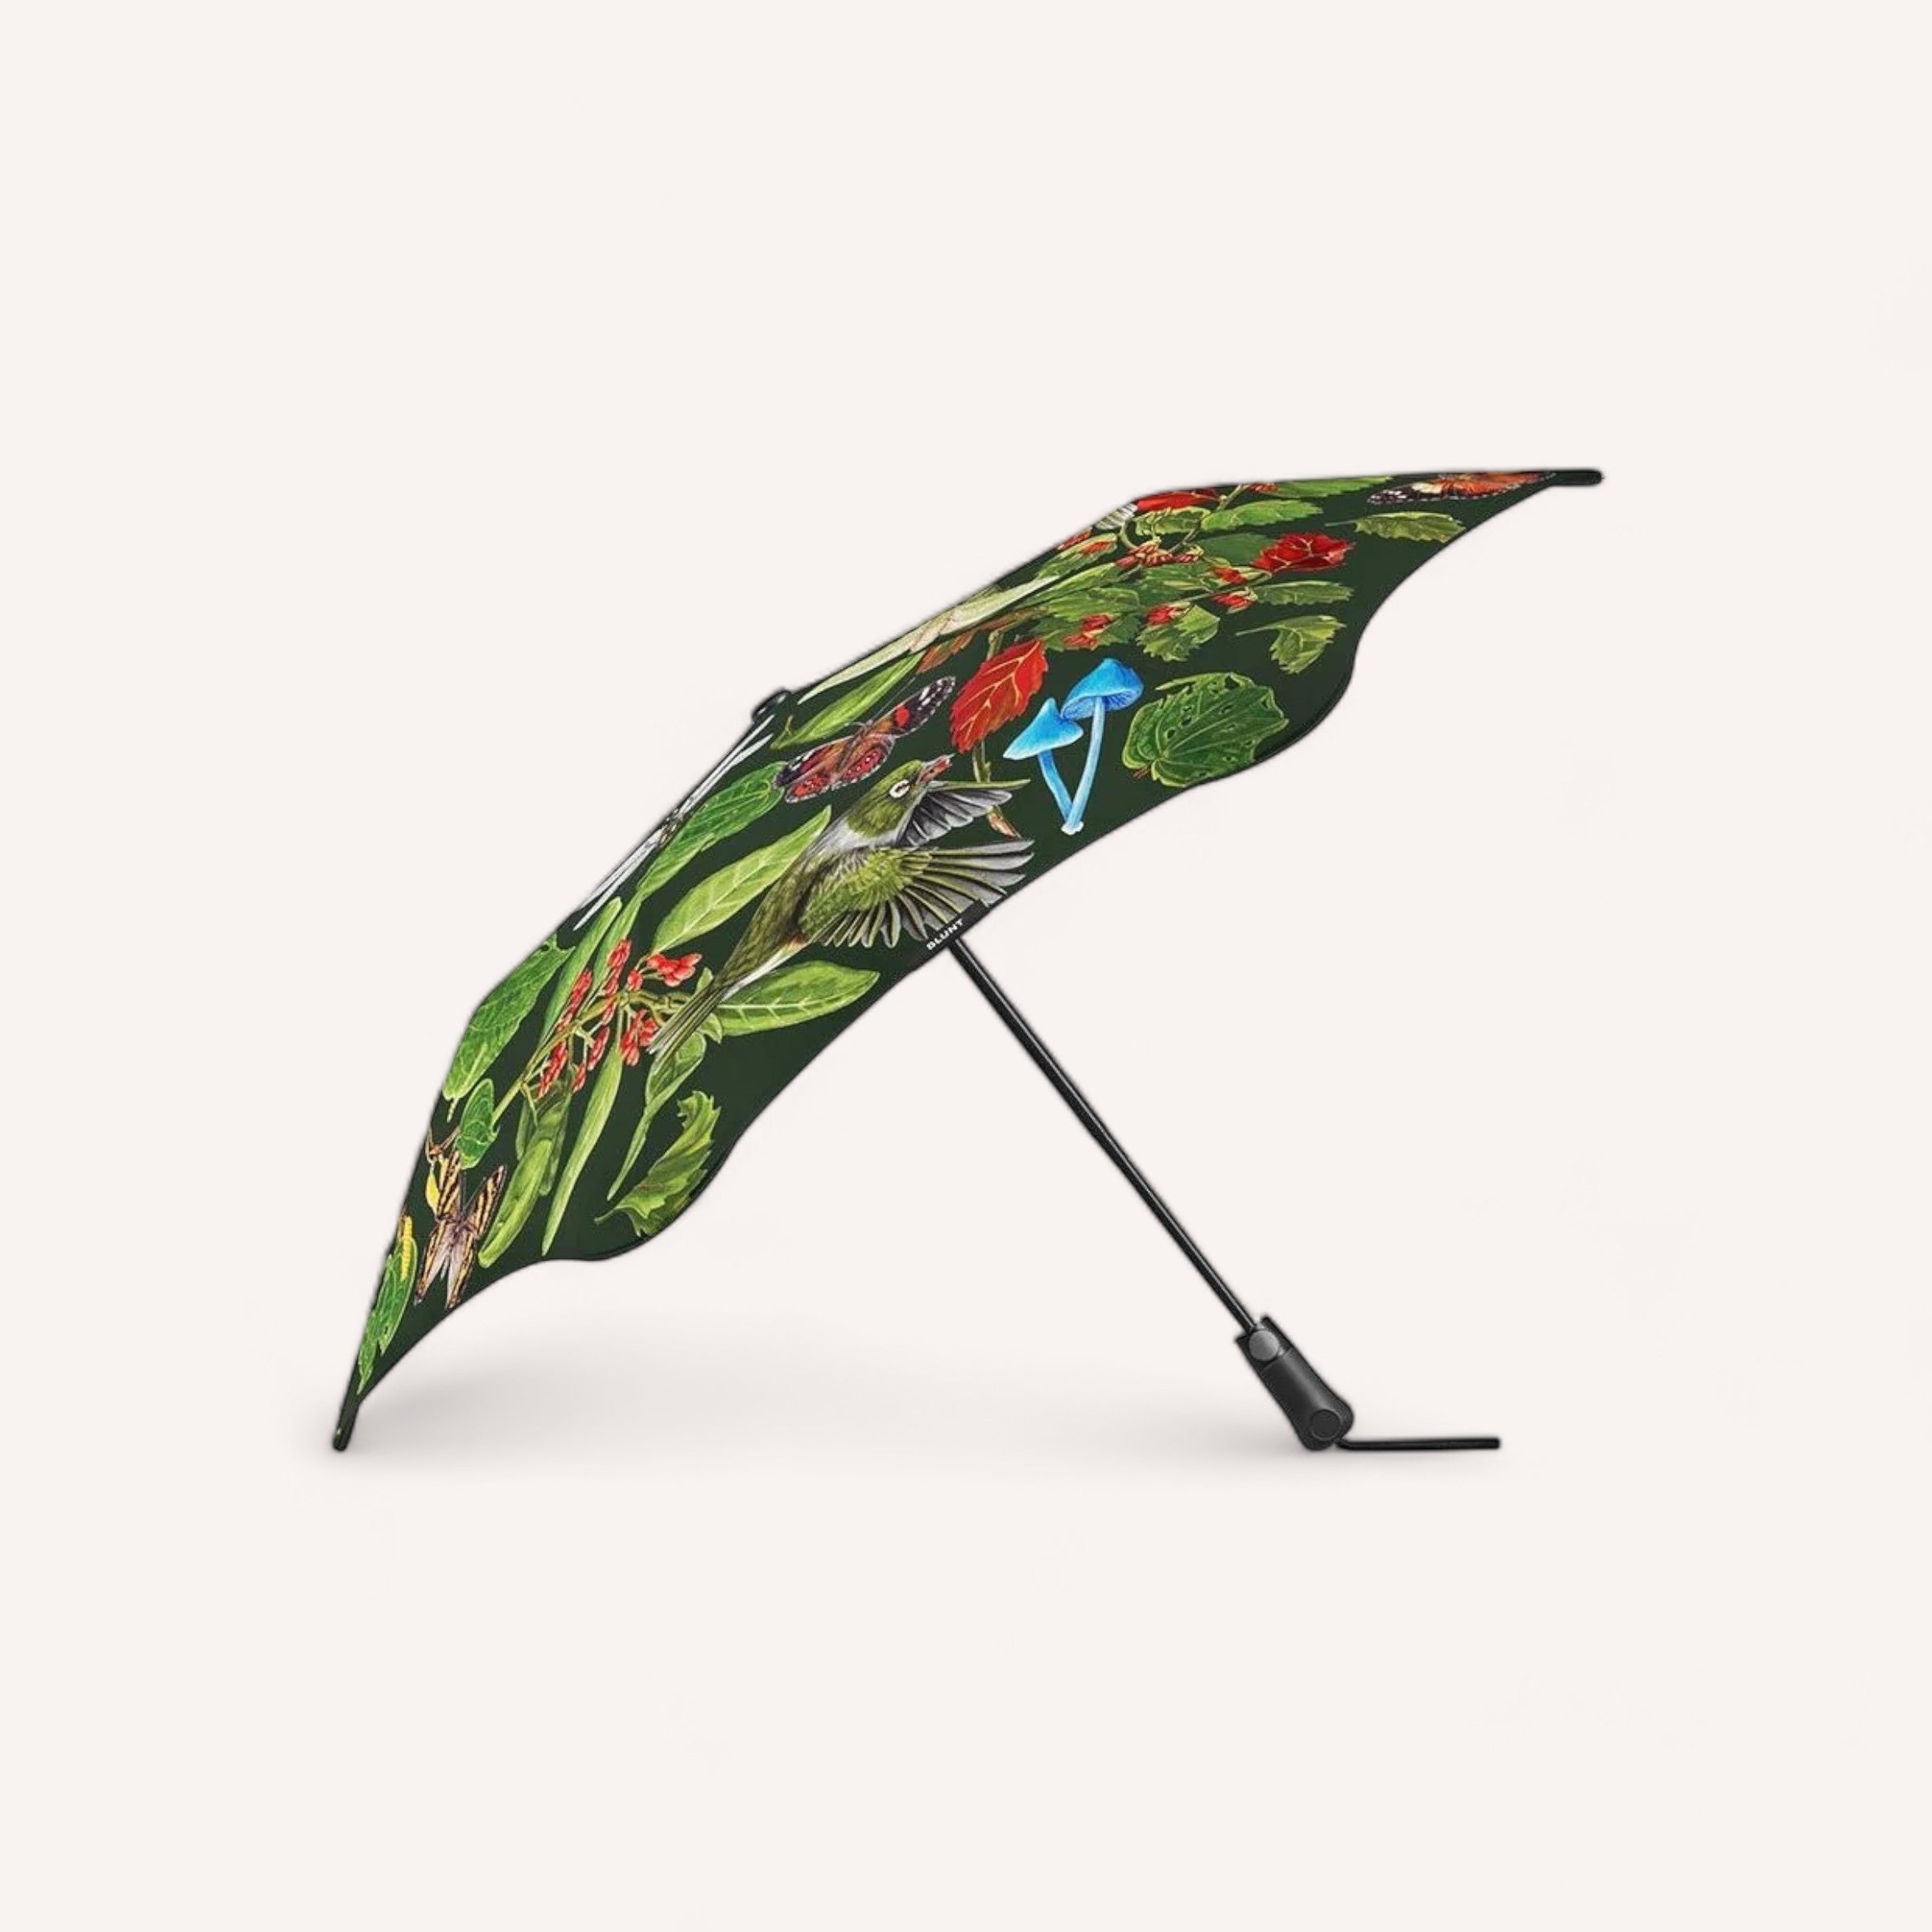 A BLUNT Metro Umbrella Forest & Bird - Limited Edition with a tropical bird and floral design, standing open on a white background.